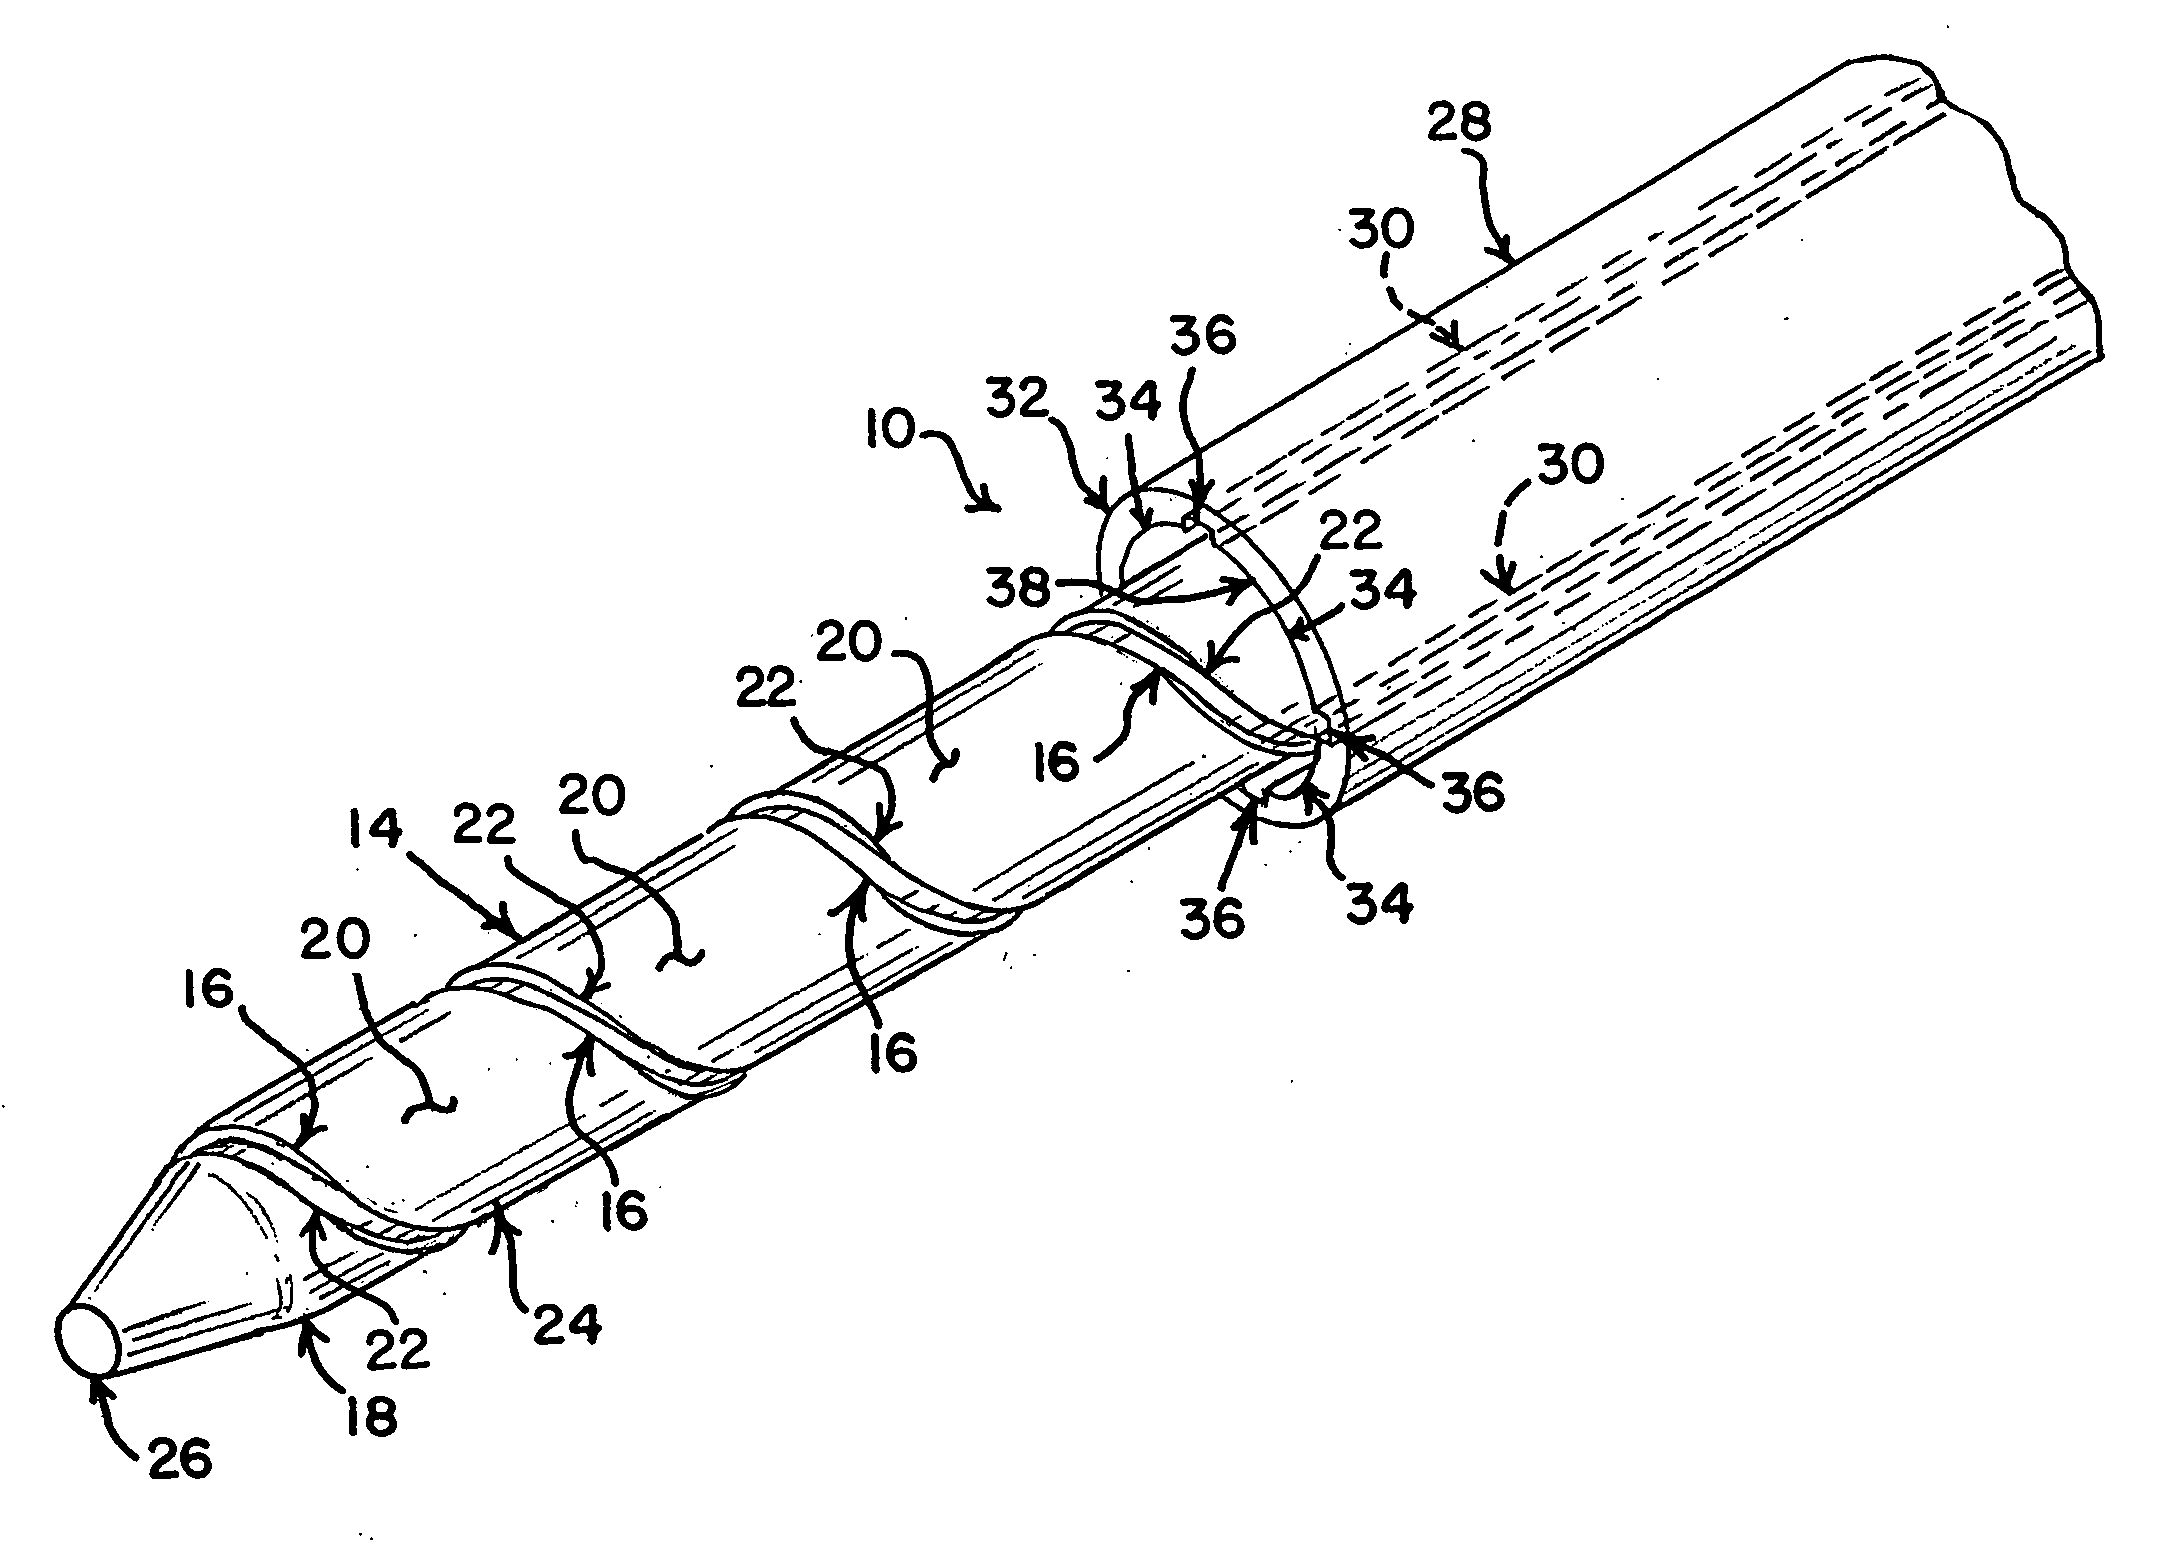 Delivery system with helical shaft